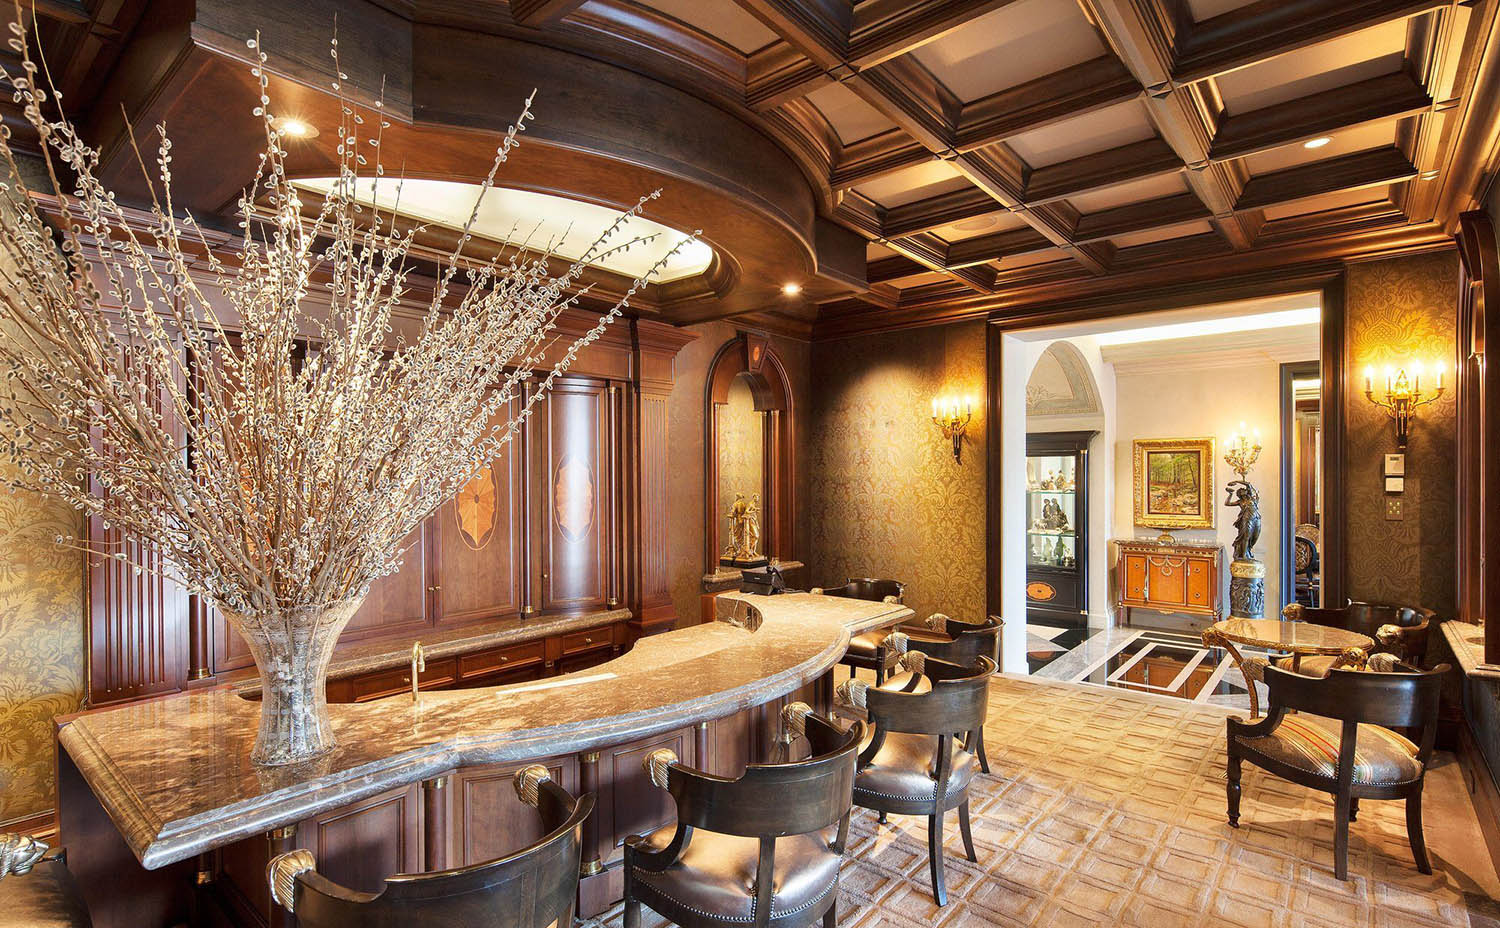 Home bar with real wood coffered ceiling. Stained wood beams with brown coffers. Wallpapered walls with wood trim.